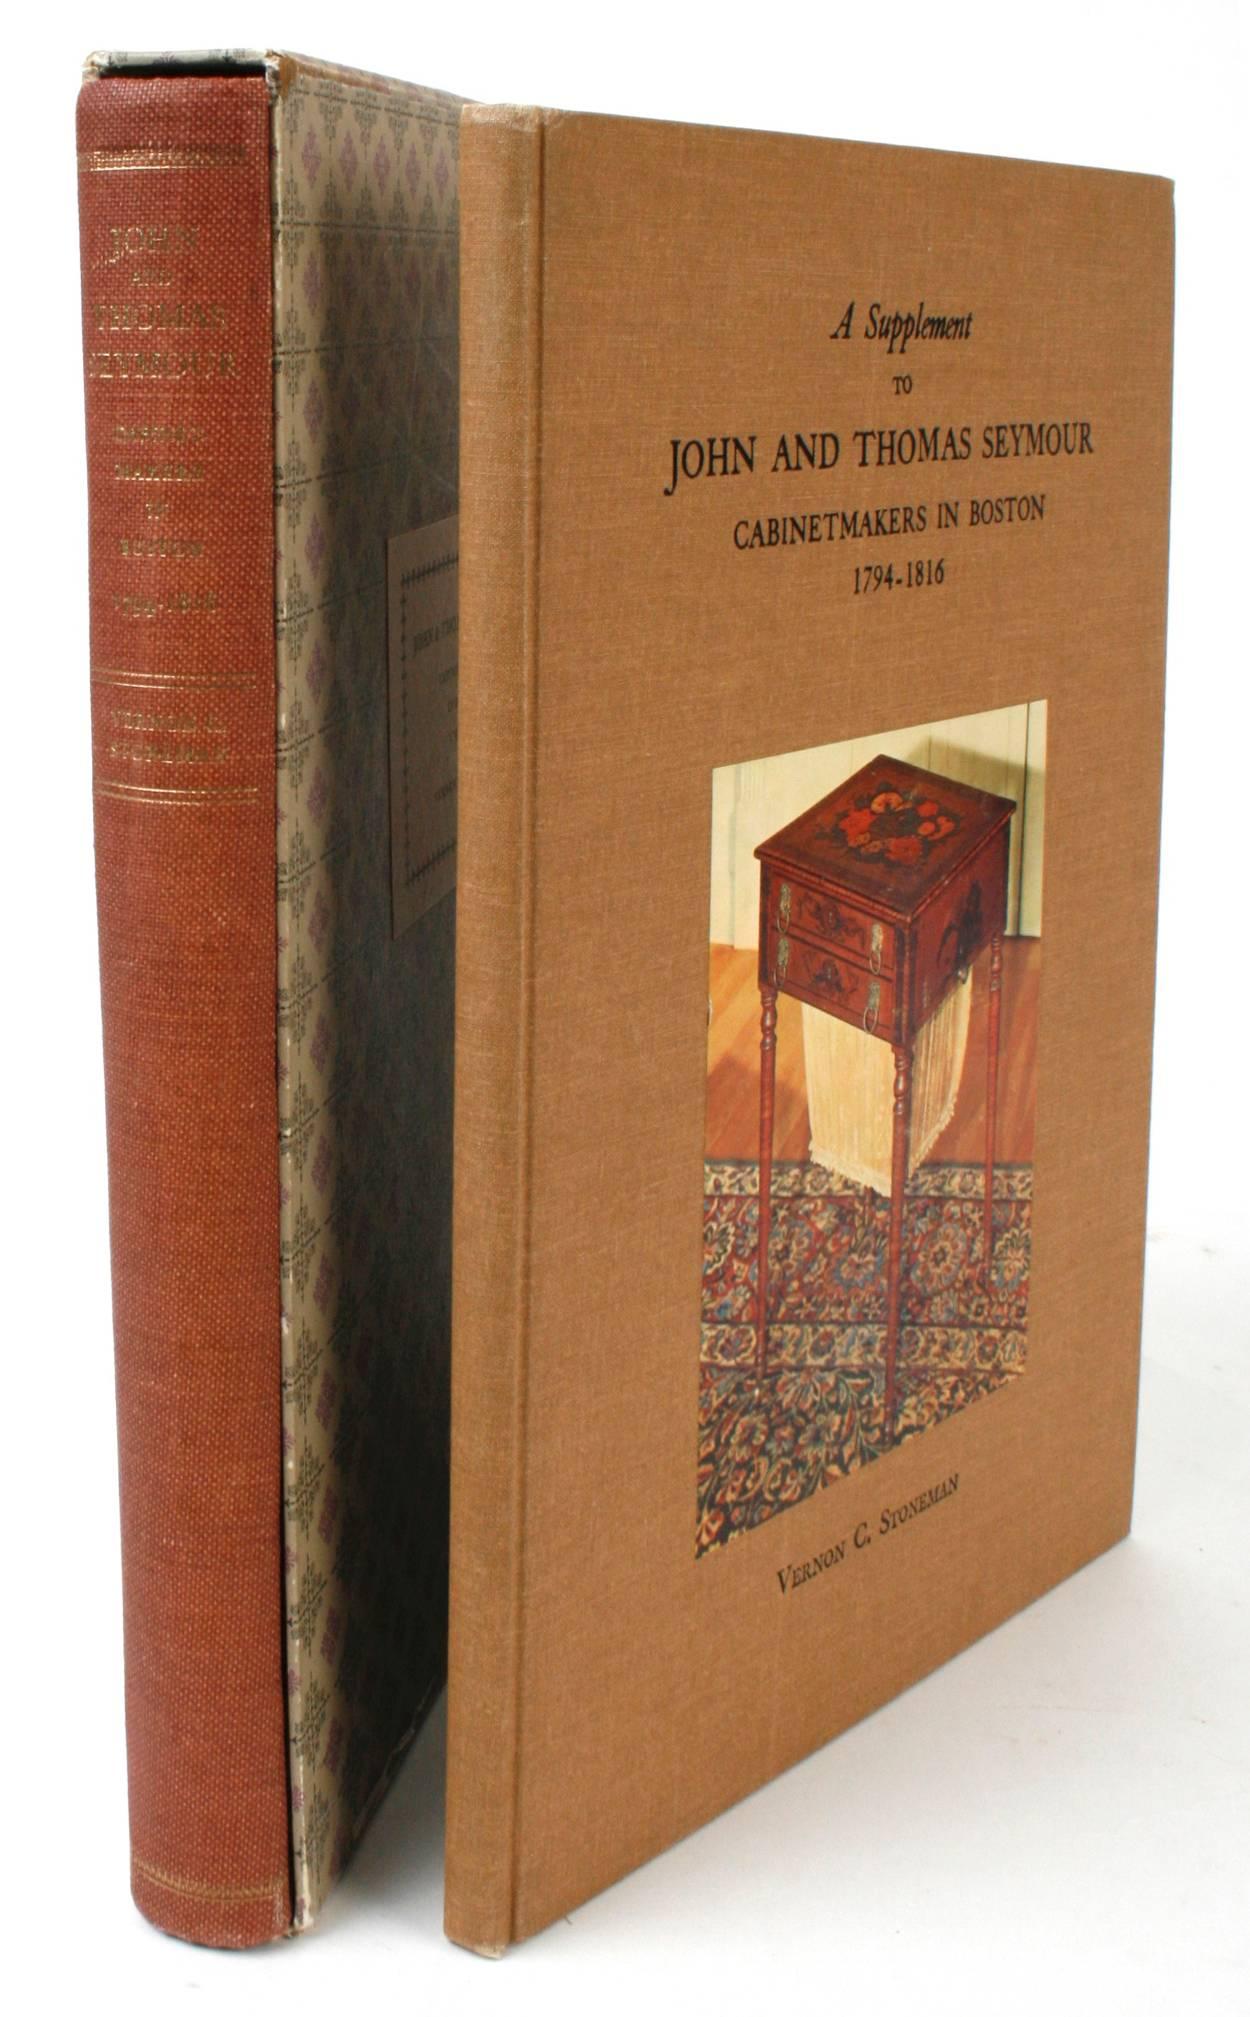 John & Thomas Seymour Cabinet Makers in Boston 1794-1816 with Supplement For Sale 9